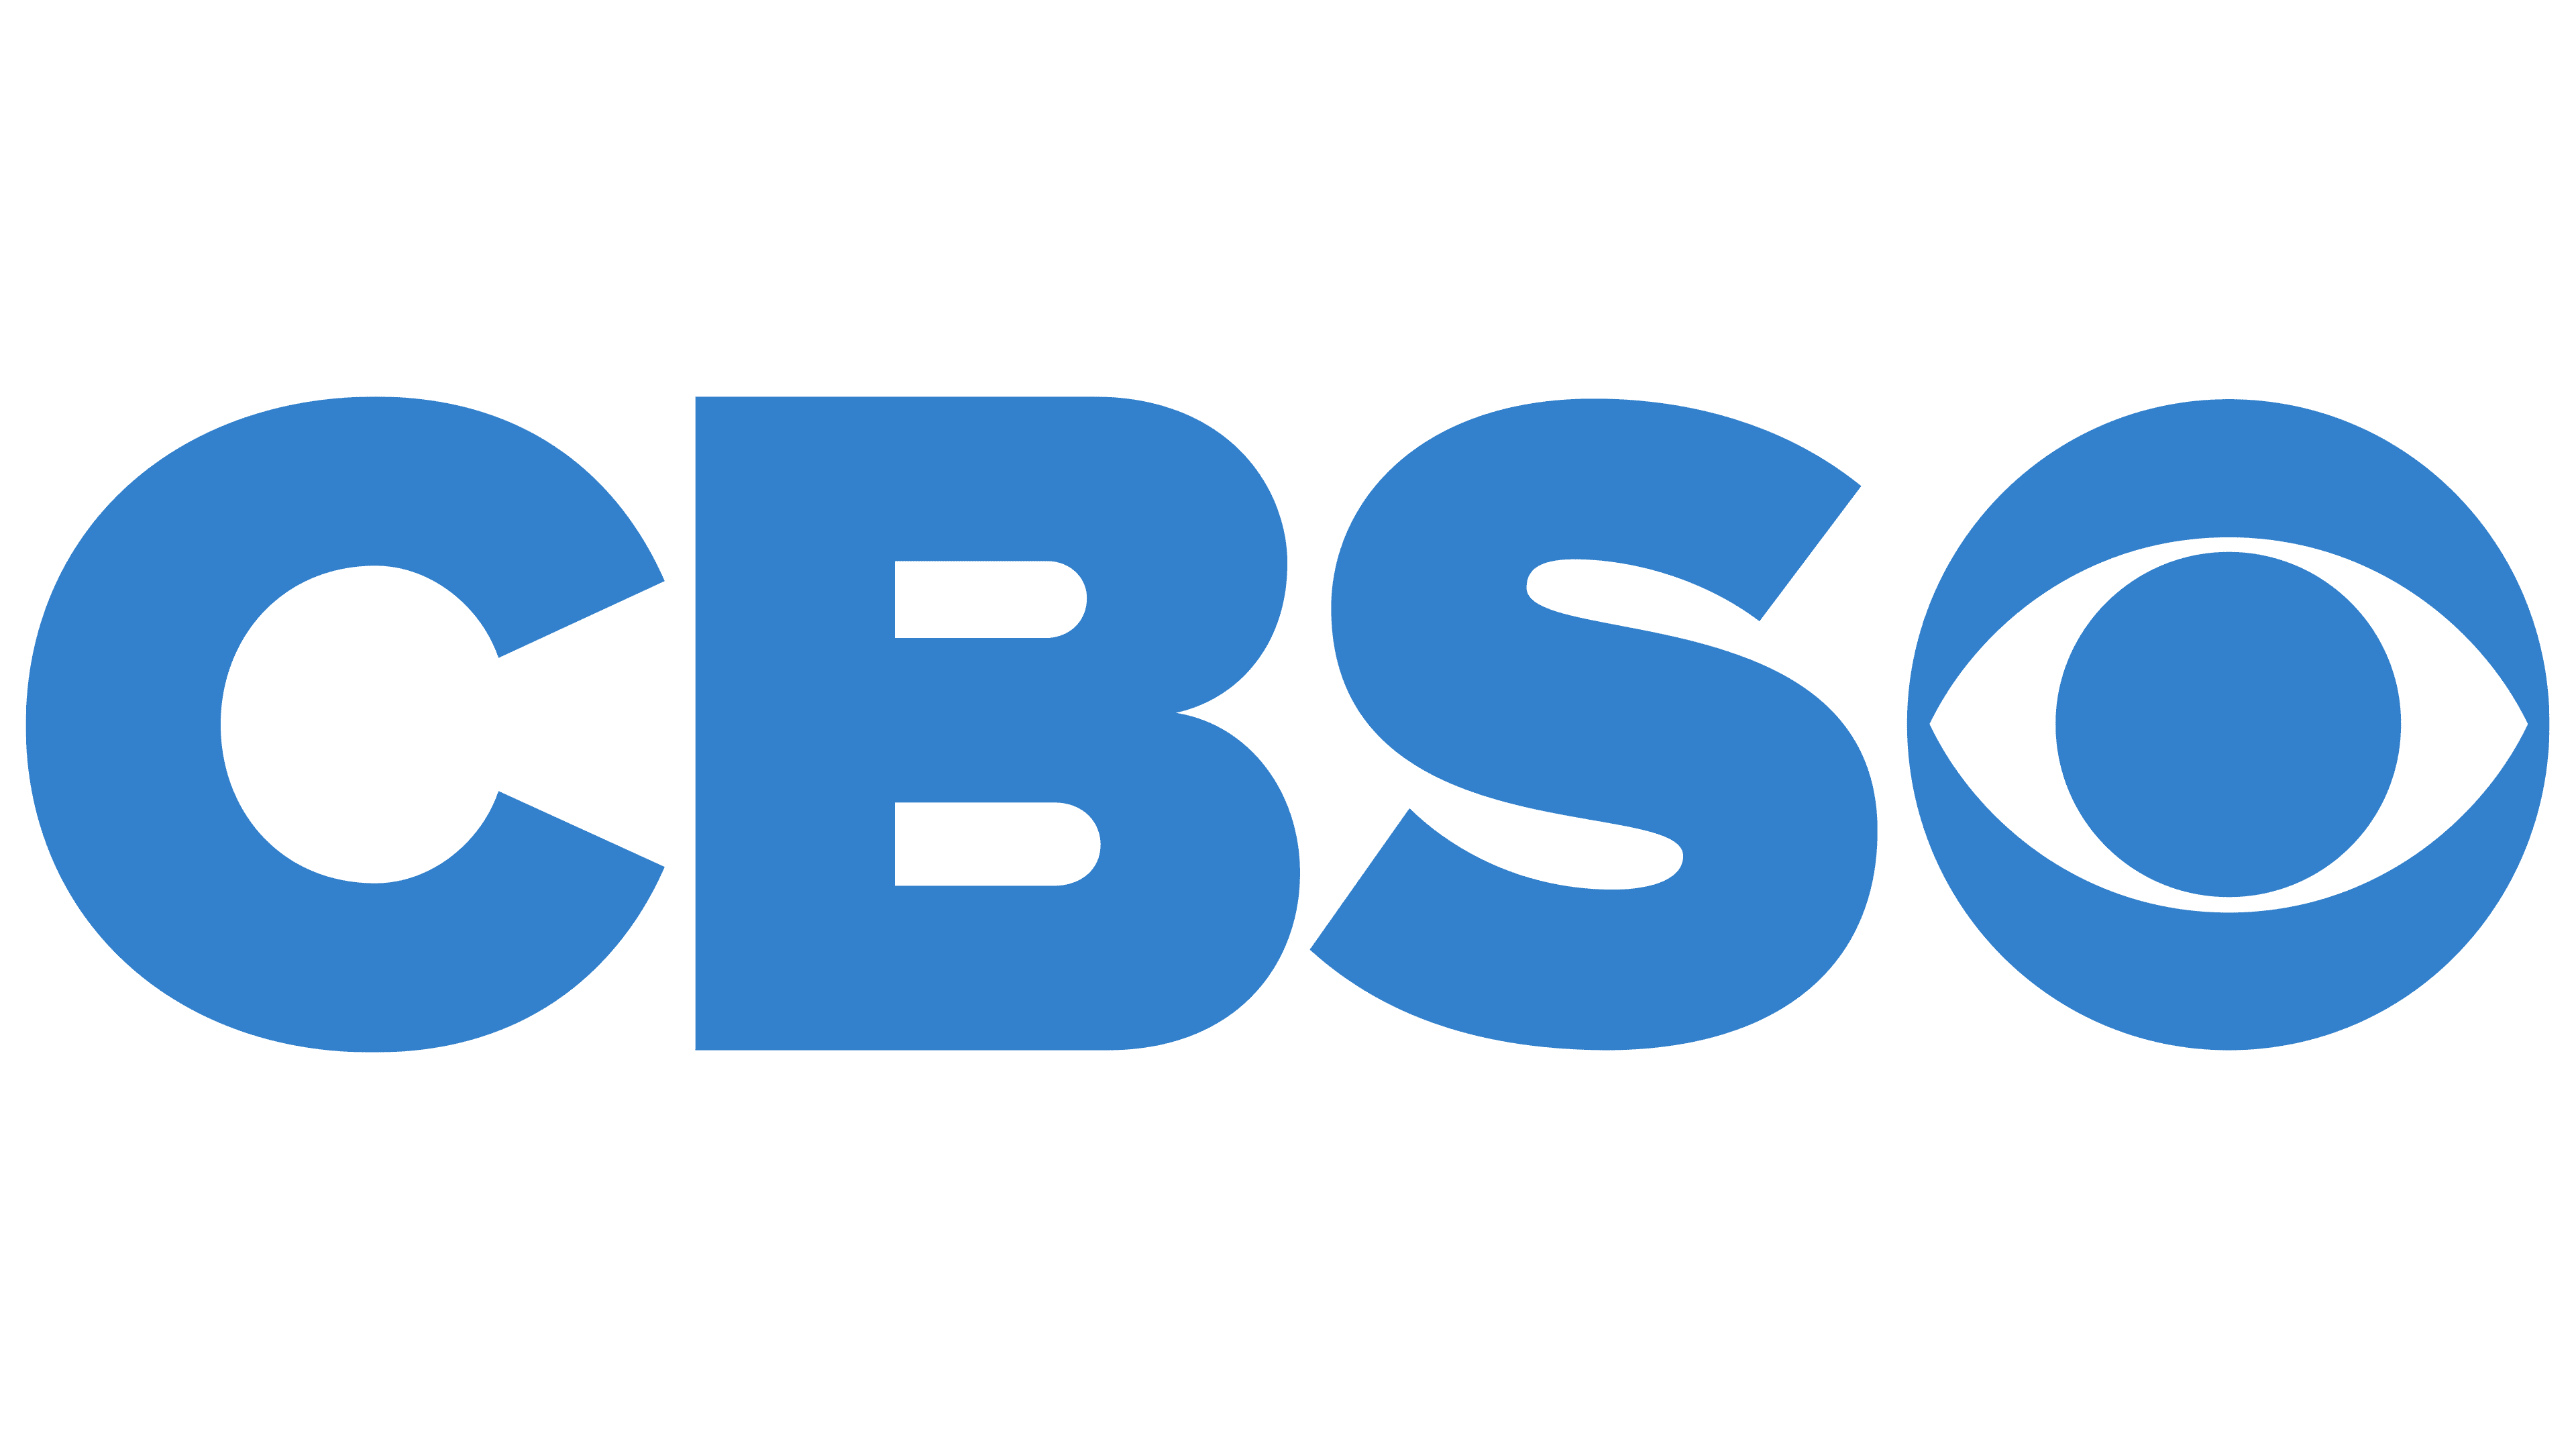 CBS Logo PNG Picture